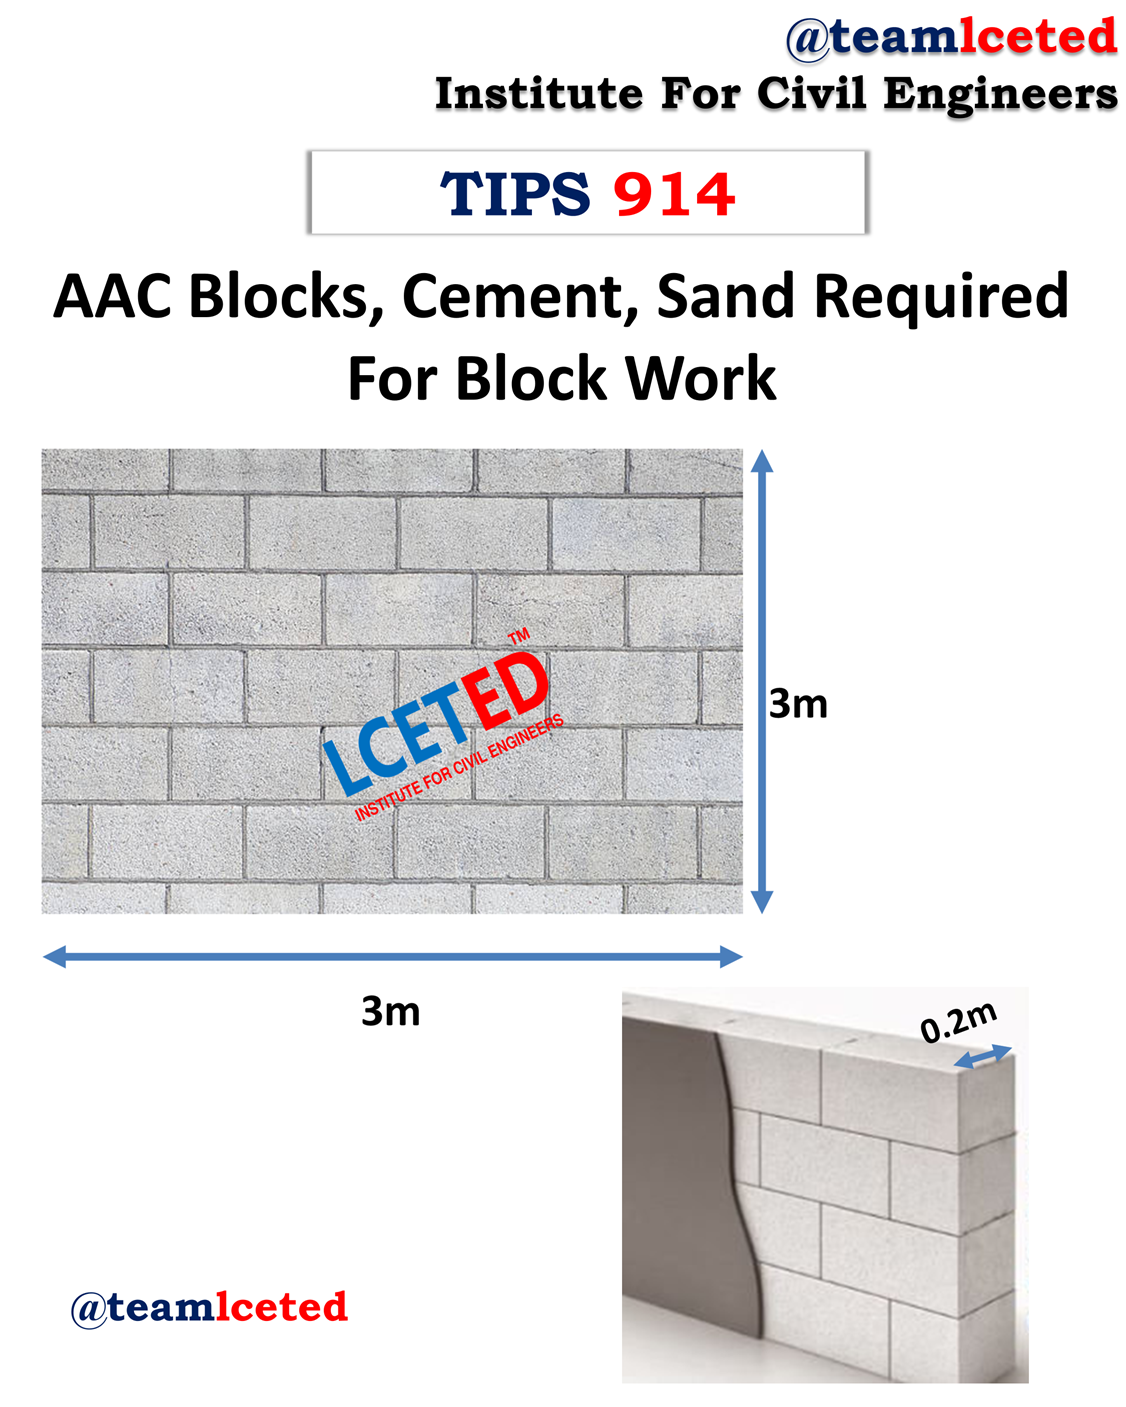 AAC Blocks, Cement, Sand Required